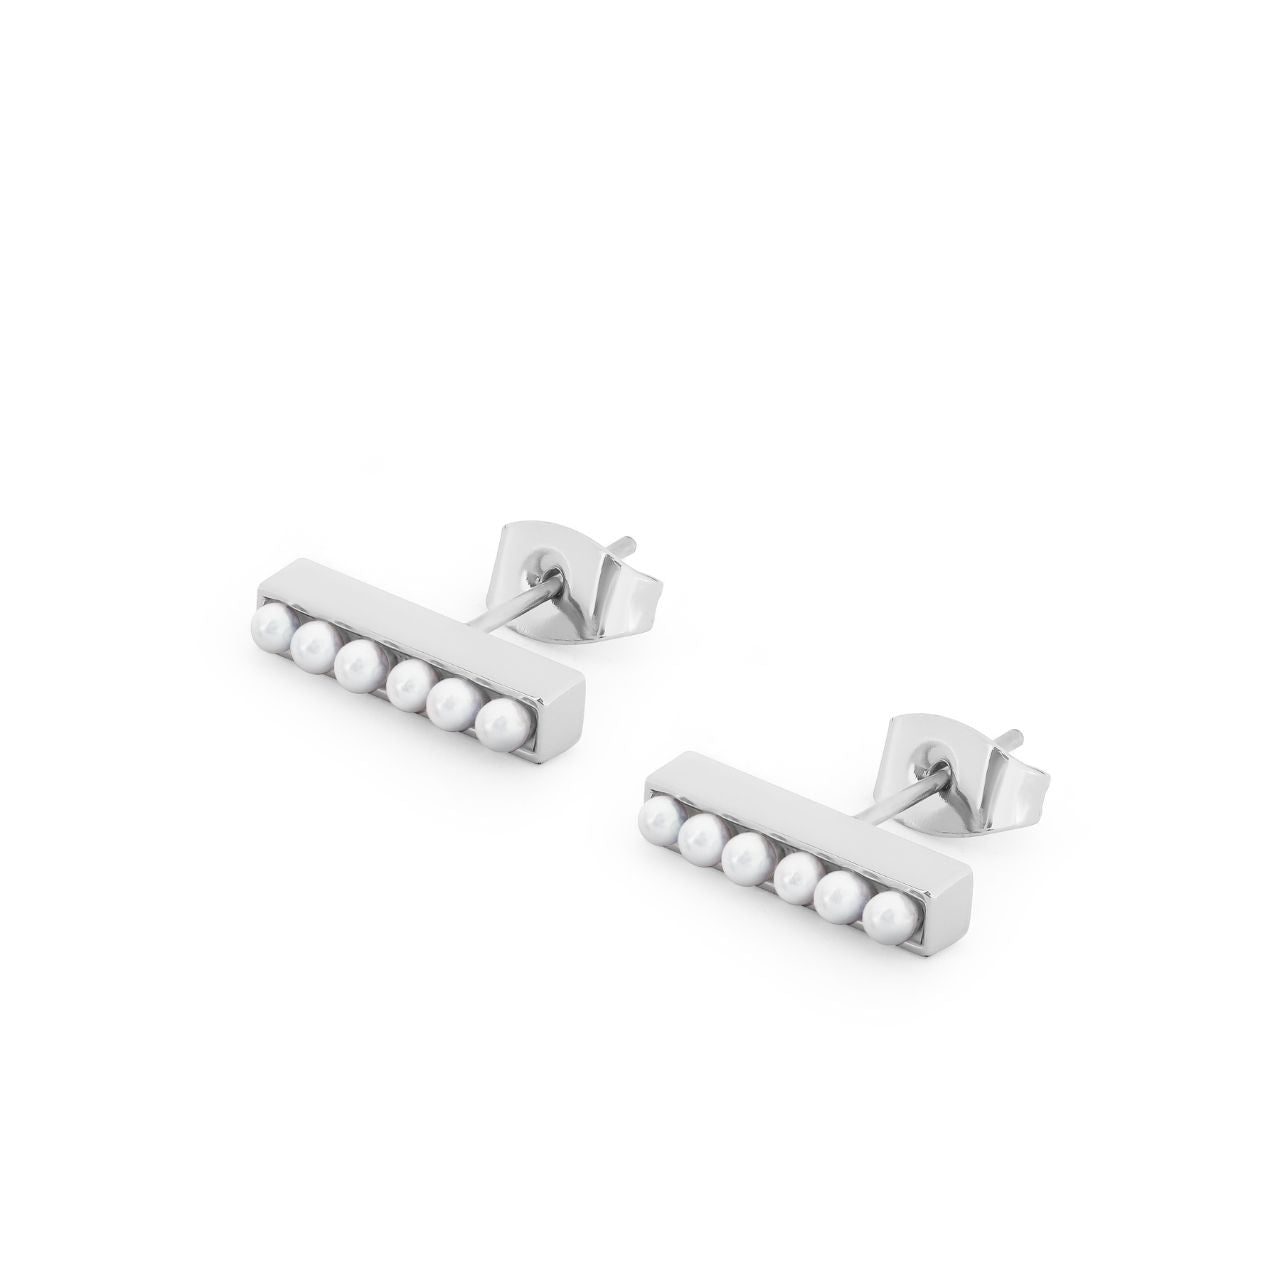 Silver Set With Pearls T-Bar Stud Earrings by Tipperary  These elegant Tipperary T-Bar Stud Earrings are crafted and finished with small pearls for a timeless look. Perfect for special occasions or everyday wear, these earrings offer a classic beauty that will last.